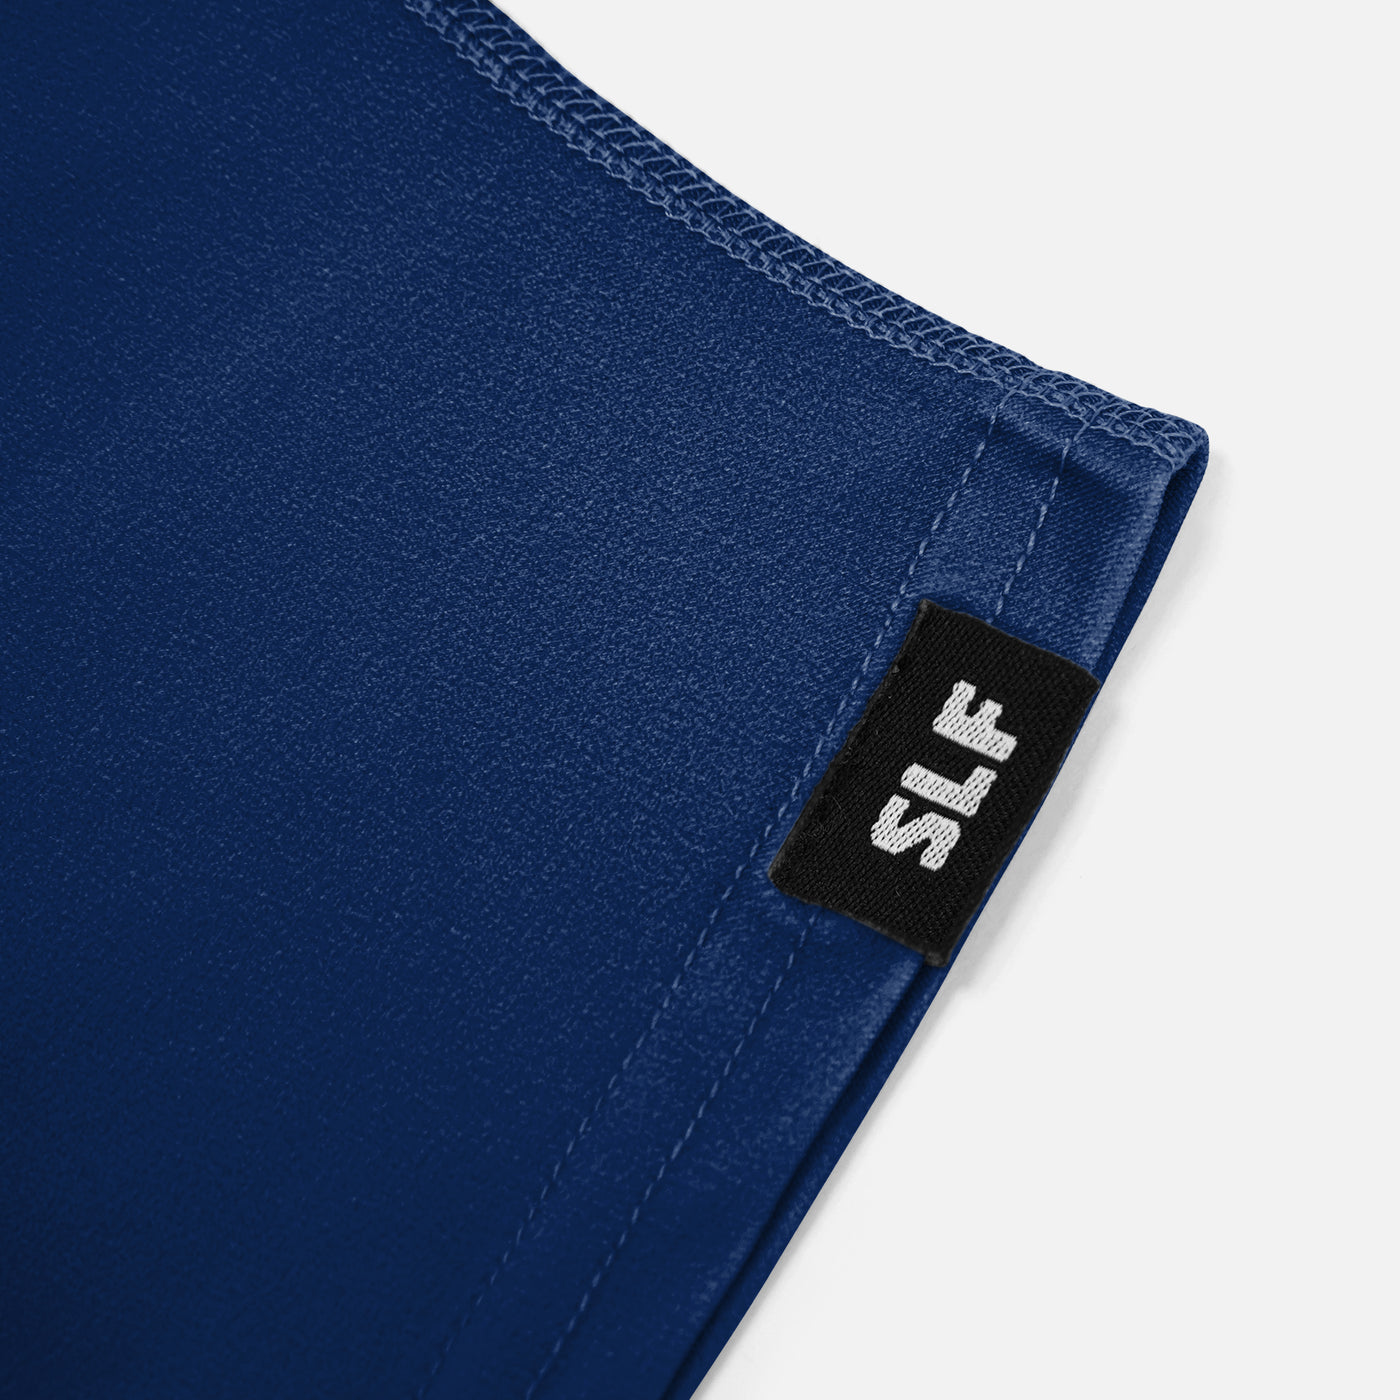 Hue Navy Spats / Cleat Covers